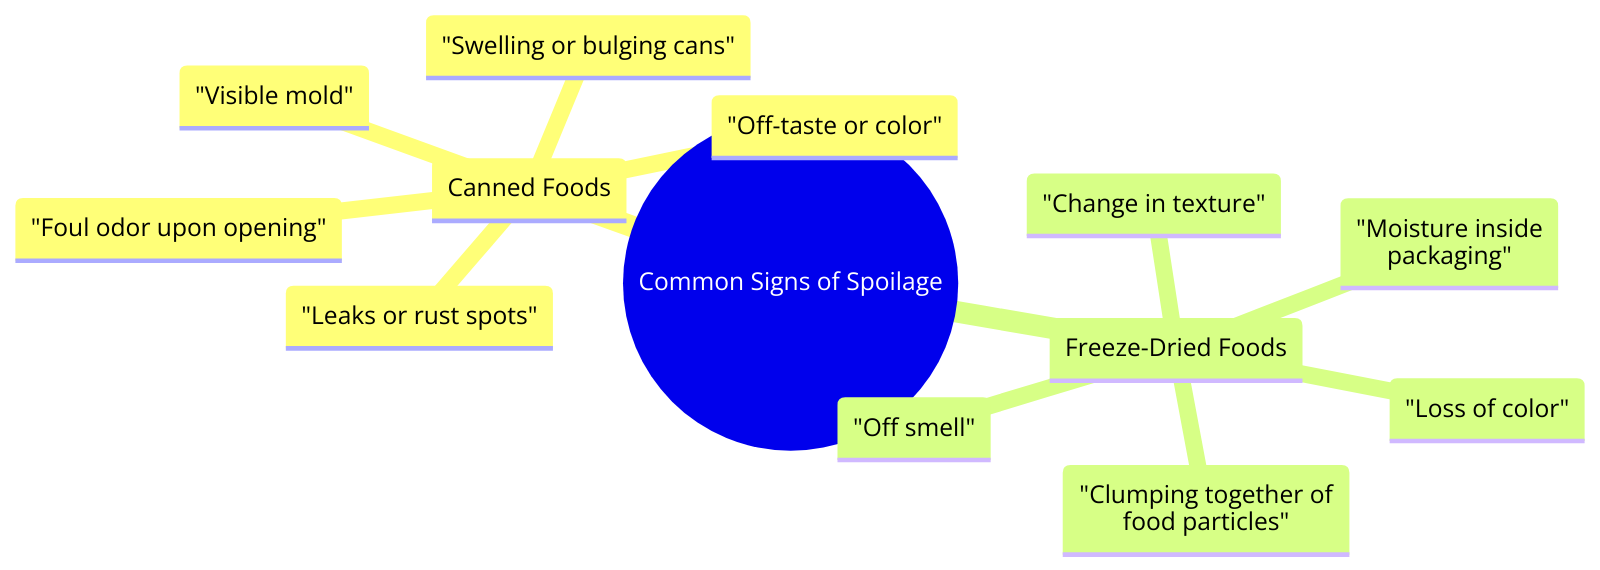  common signs of spoilage in canned and freeze-dried foods